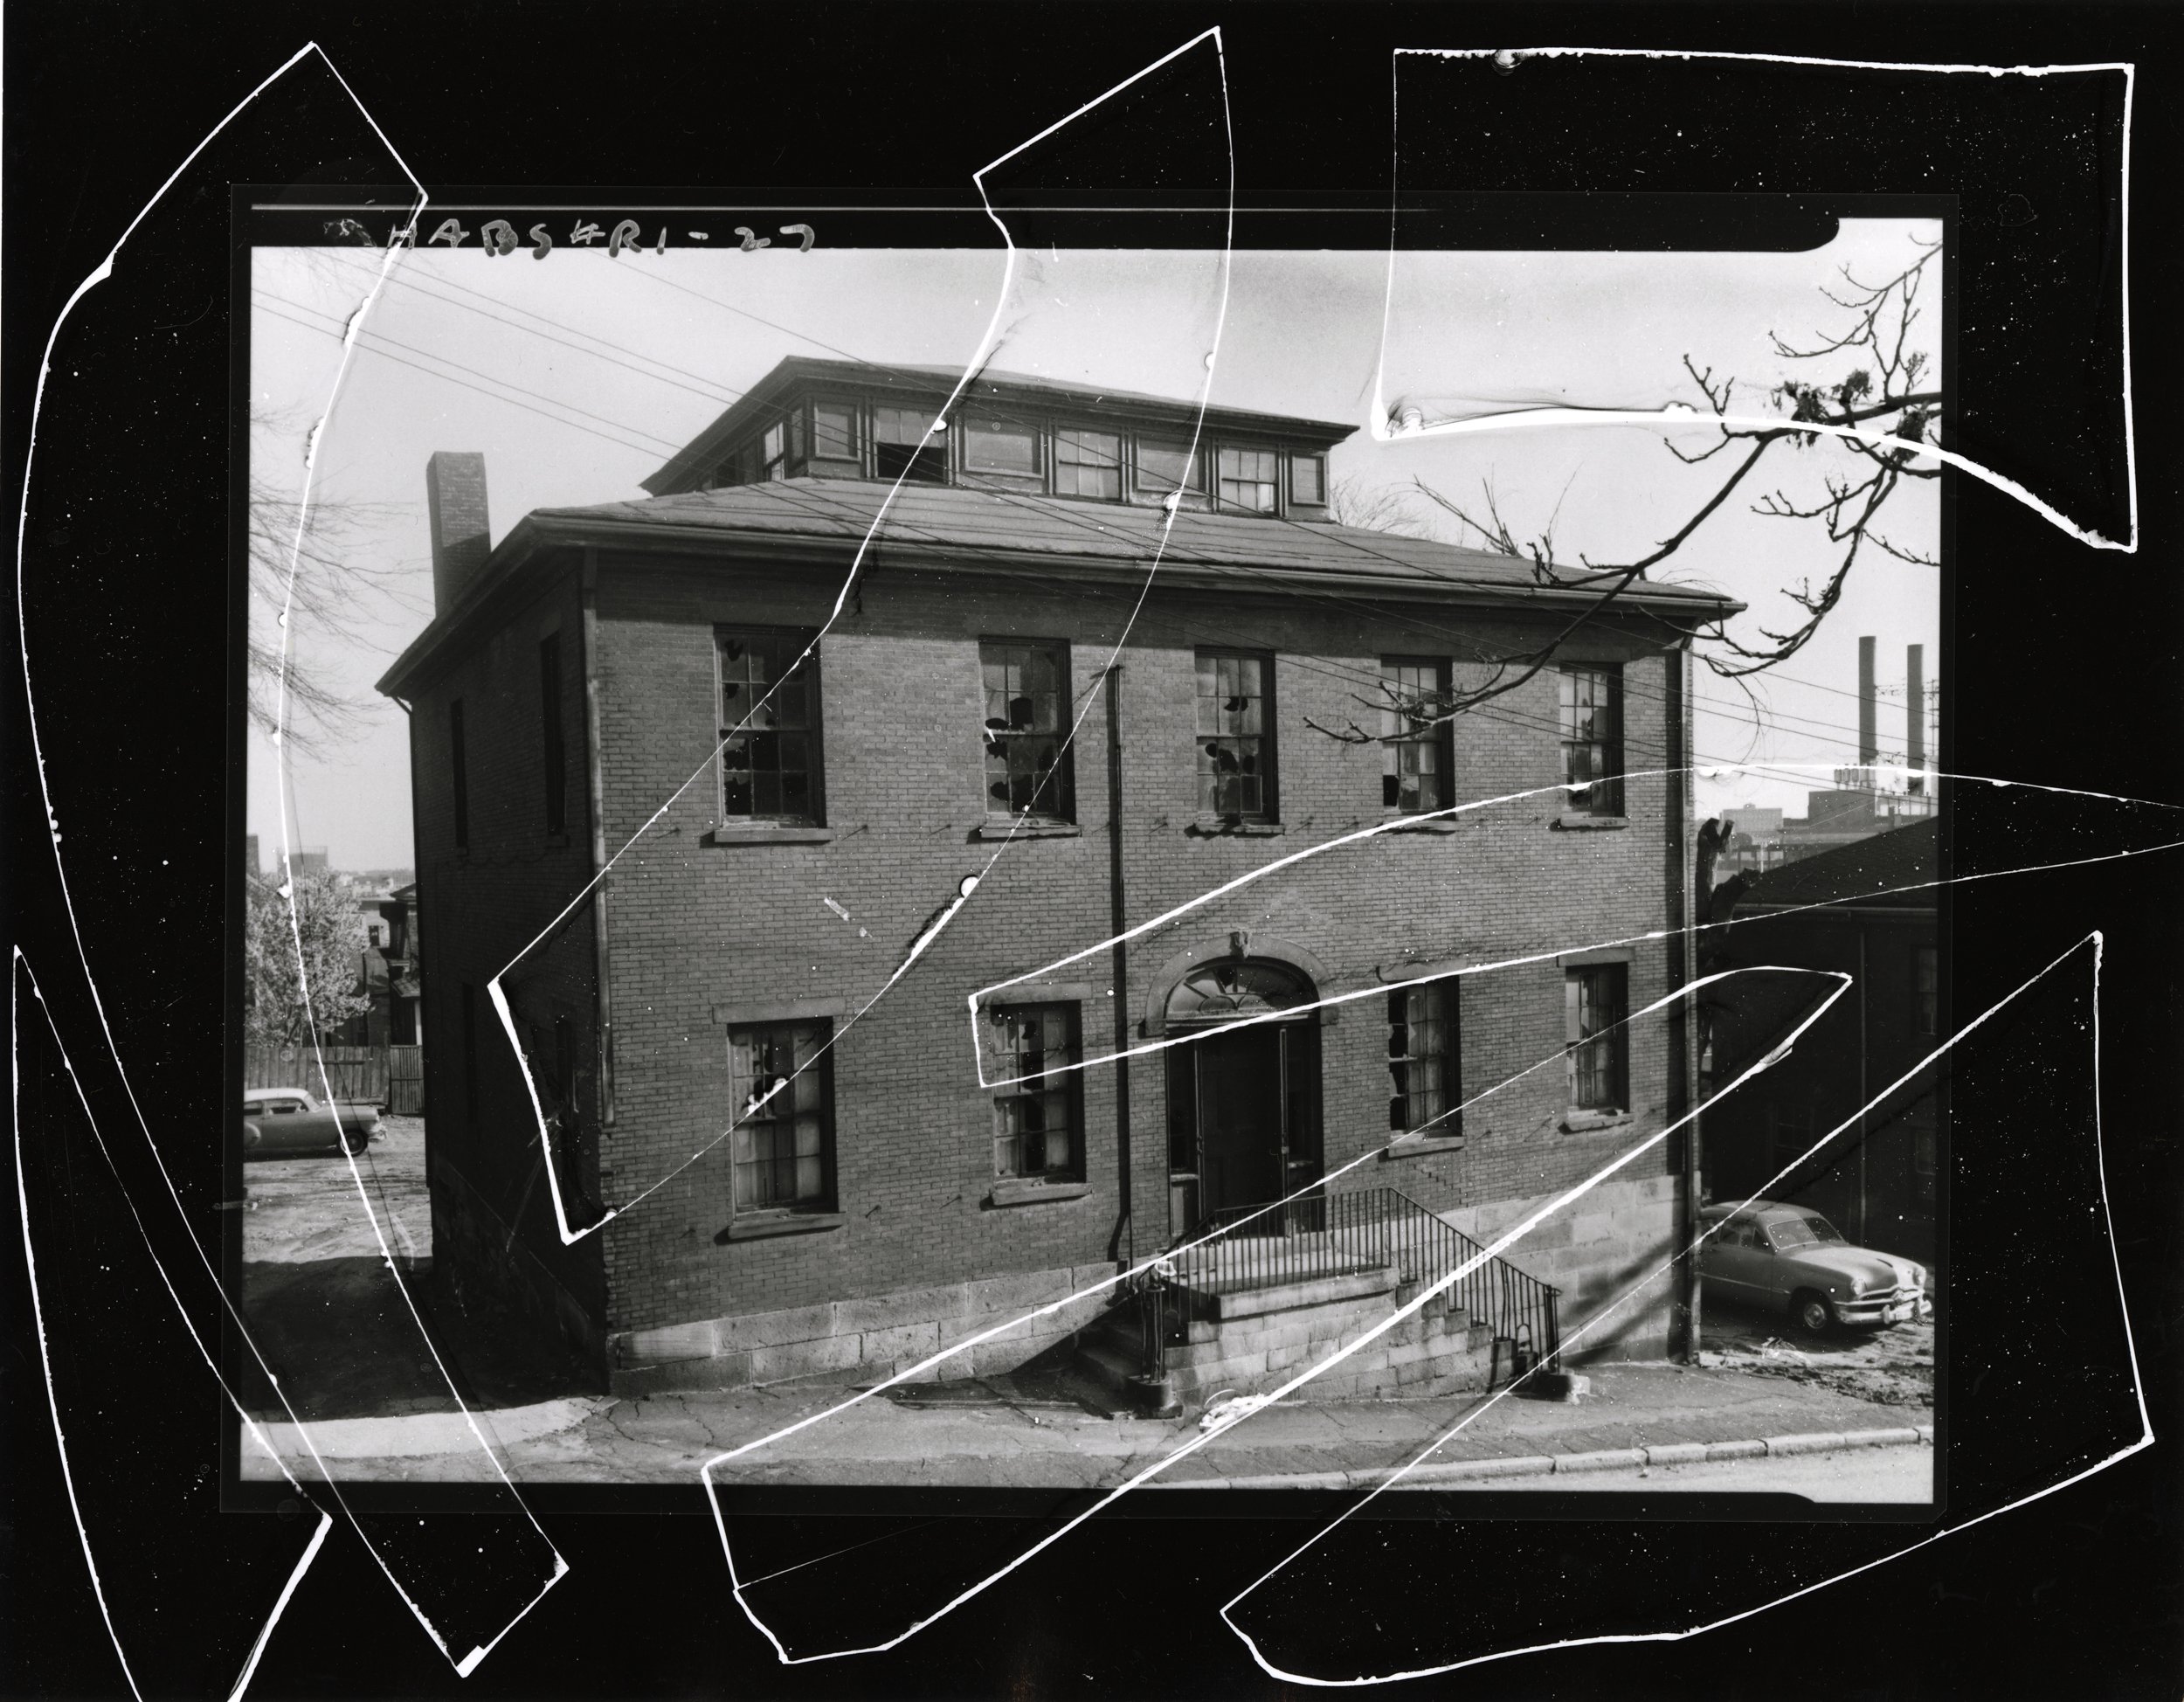   William Woodward House, 22 James Street, Providence, Providence County, RI   reprinted with elaboration, Schenectady NY, April, 2023, 11x14” gelatin silver print, unique 